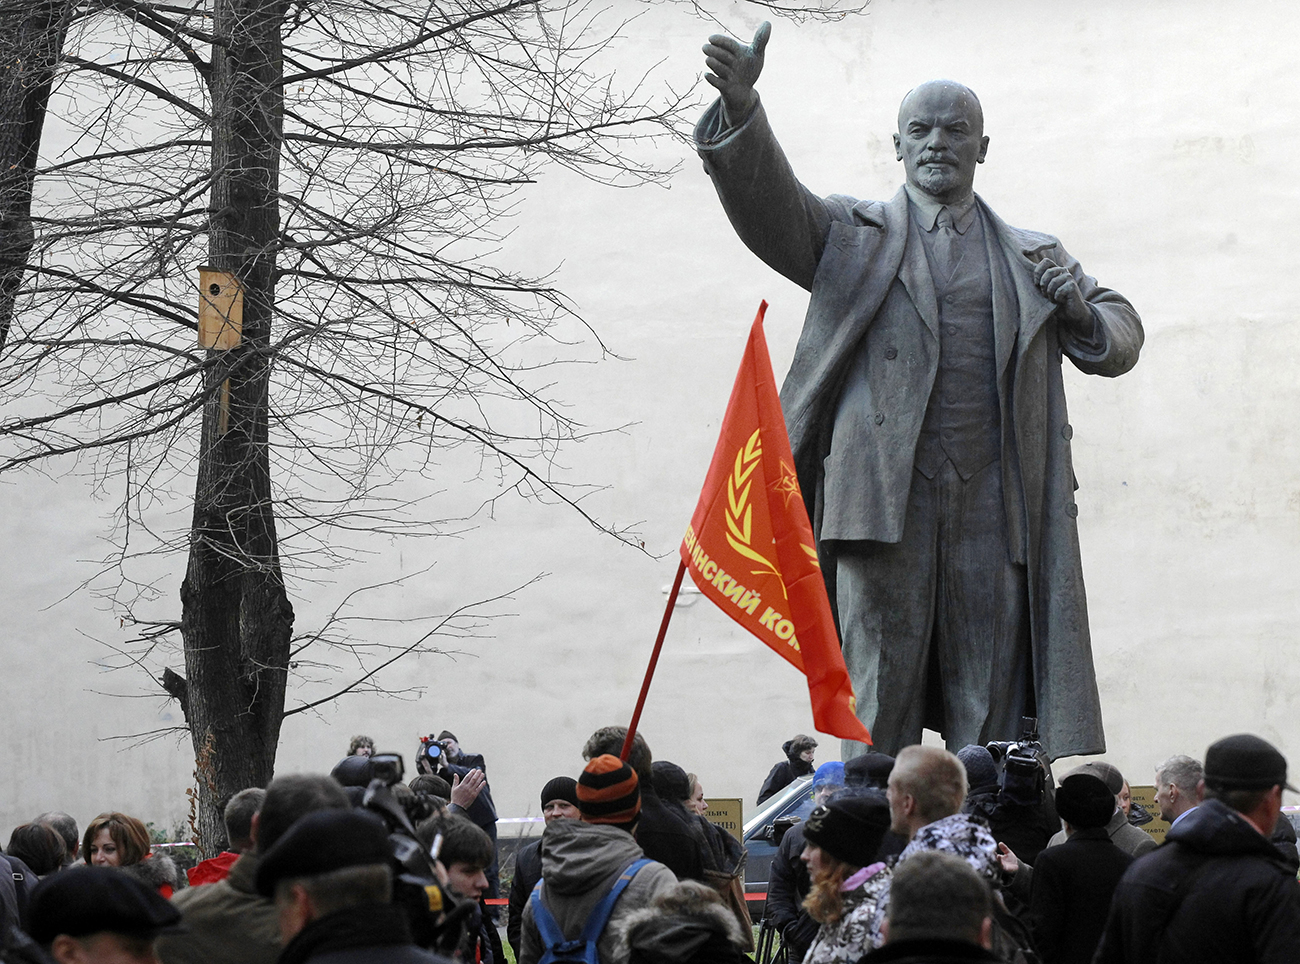 In 2017, about a quarter of respondents believe no one will ever try to follow in Lenin’s footsteps again.